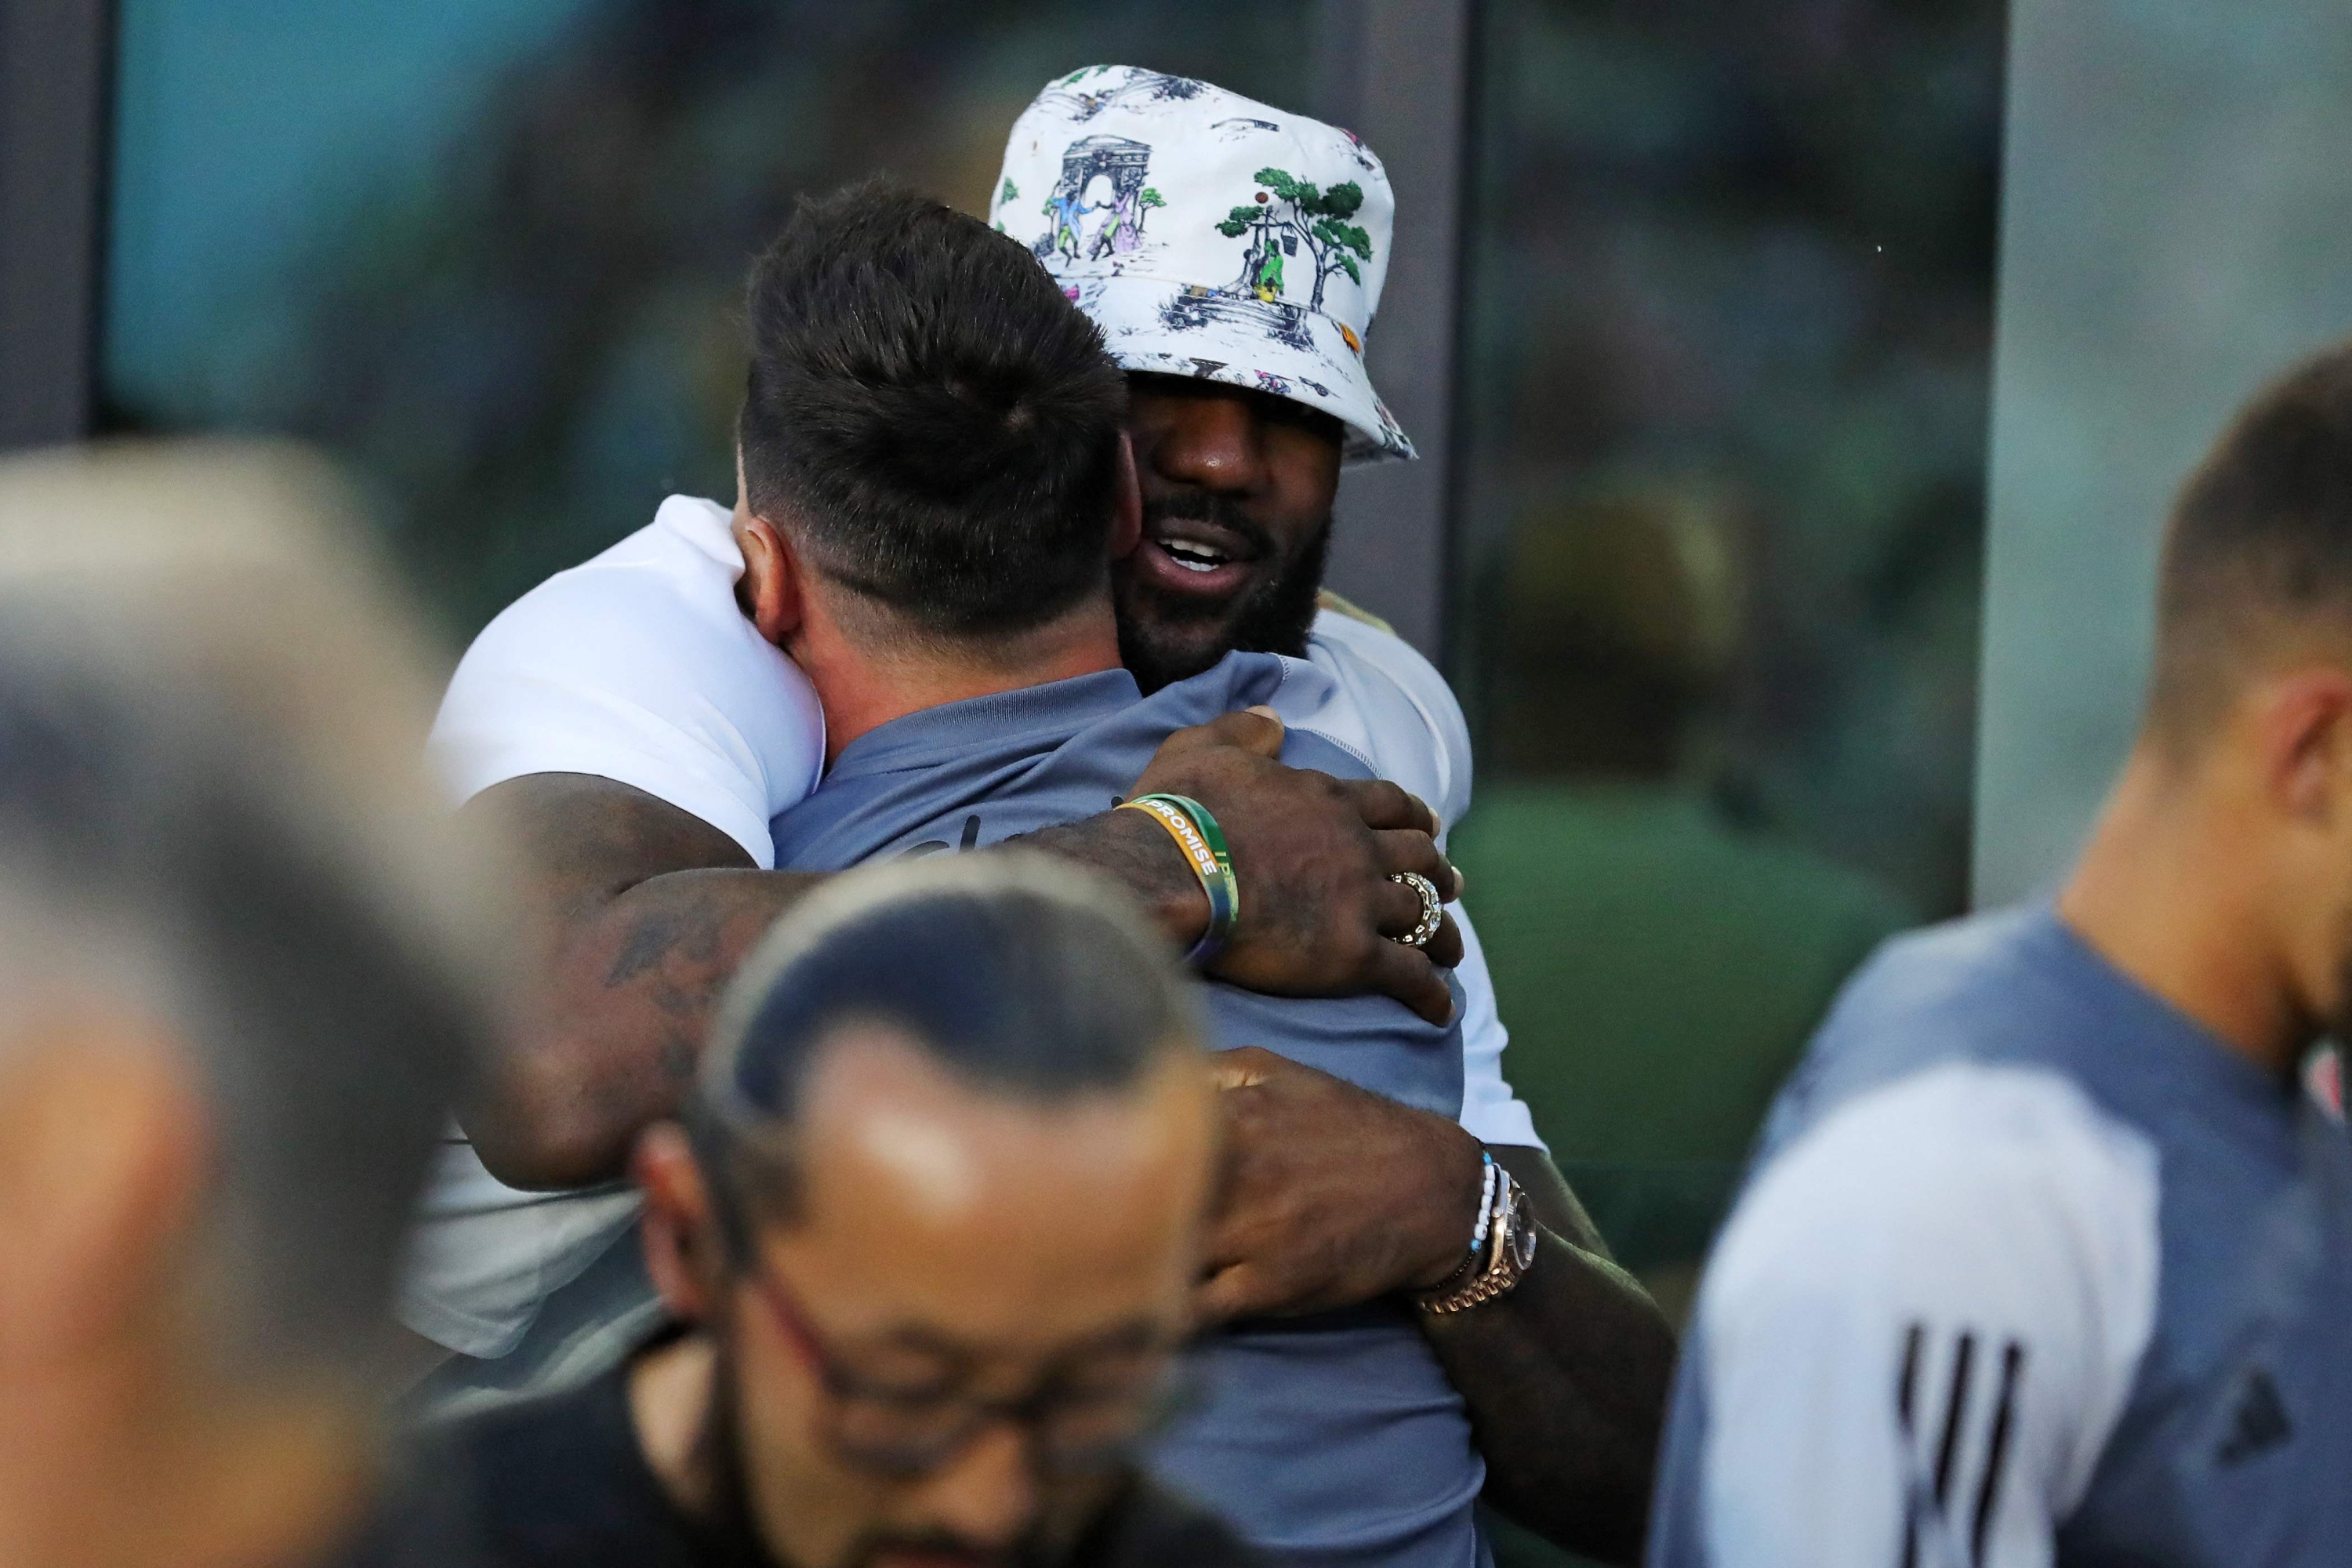 FORT LAUDERDALE, FLORIDA - JULY 21: (L-R) NBA player LeBron James of the Los Angeles Lakers hugs Lionel Messi #10 of Inter Miami CF prior to the Leagues Cup 2023 match between Cruz Azul and Inter Miami CF at DRV PNK Stadium on July 21, 2023 in Fort Lauderdale, Florida.   Megan Briggs/Getty Images/AFP (Photo by Megan Briggs / GETTY IMAGES NORTH AMERICA / Getty Images via AFP)